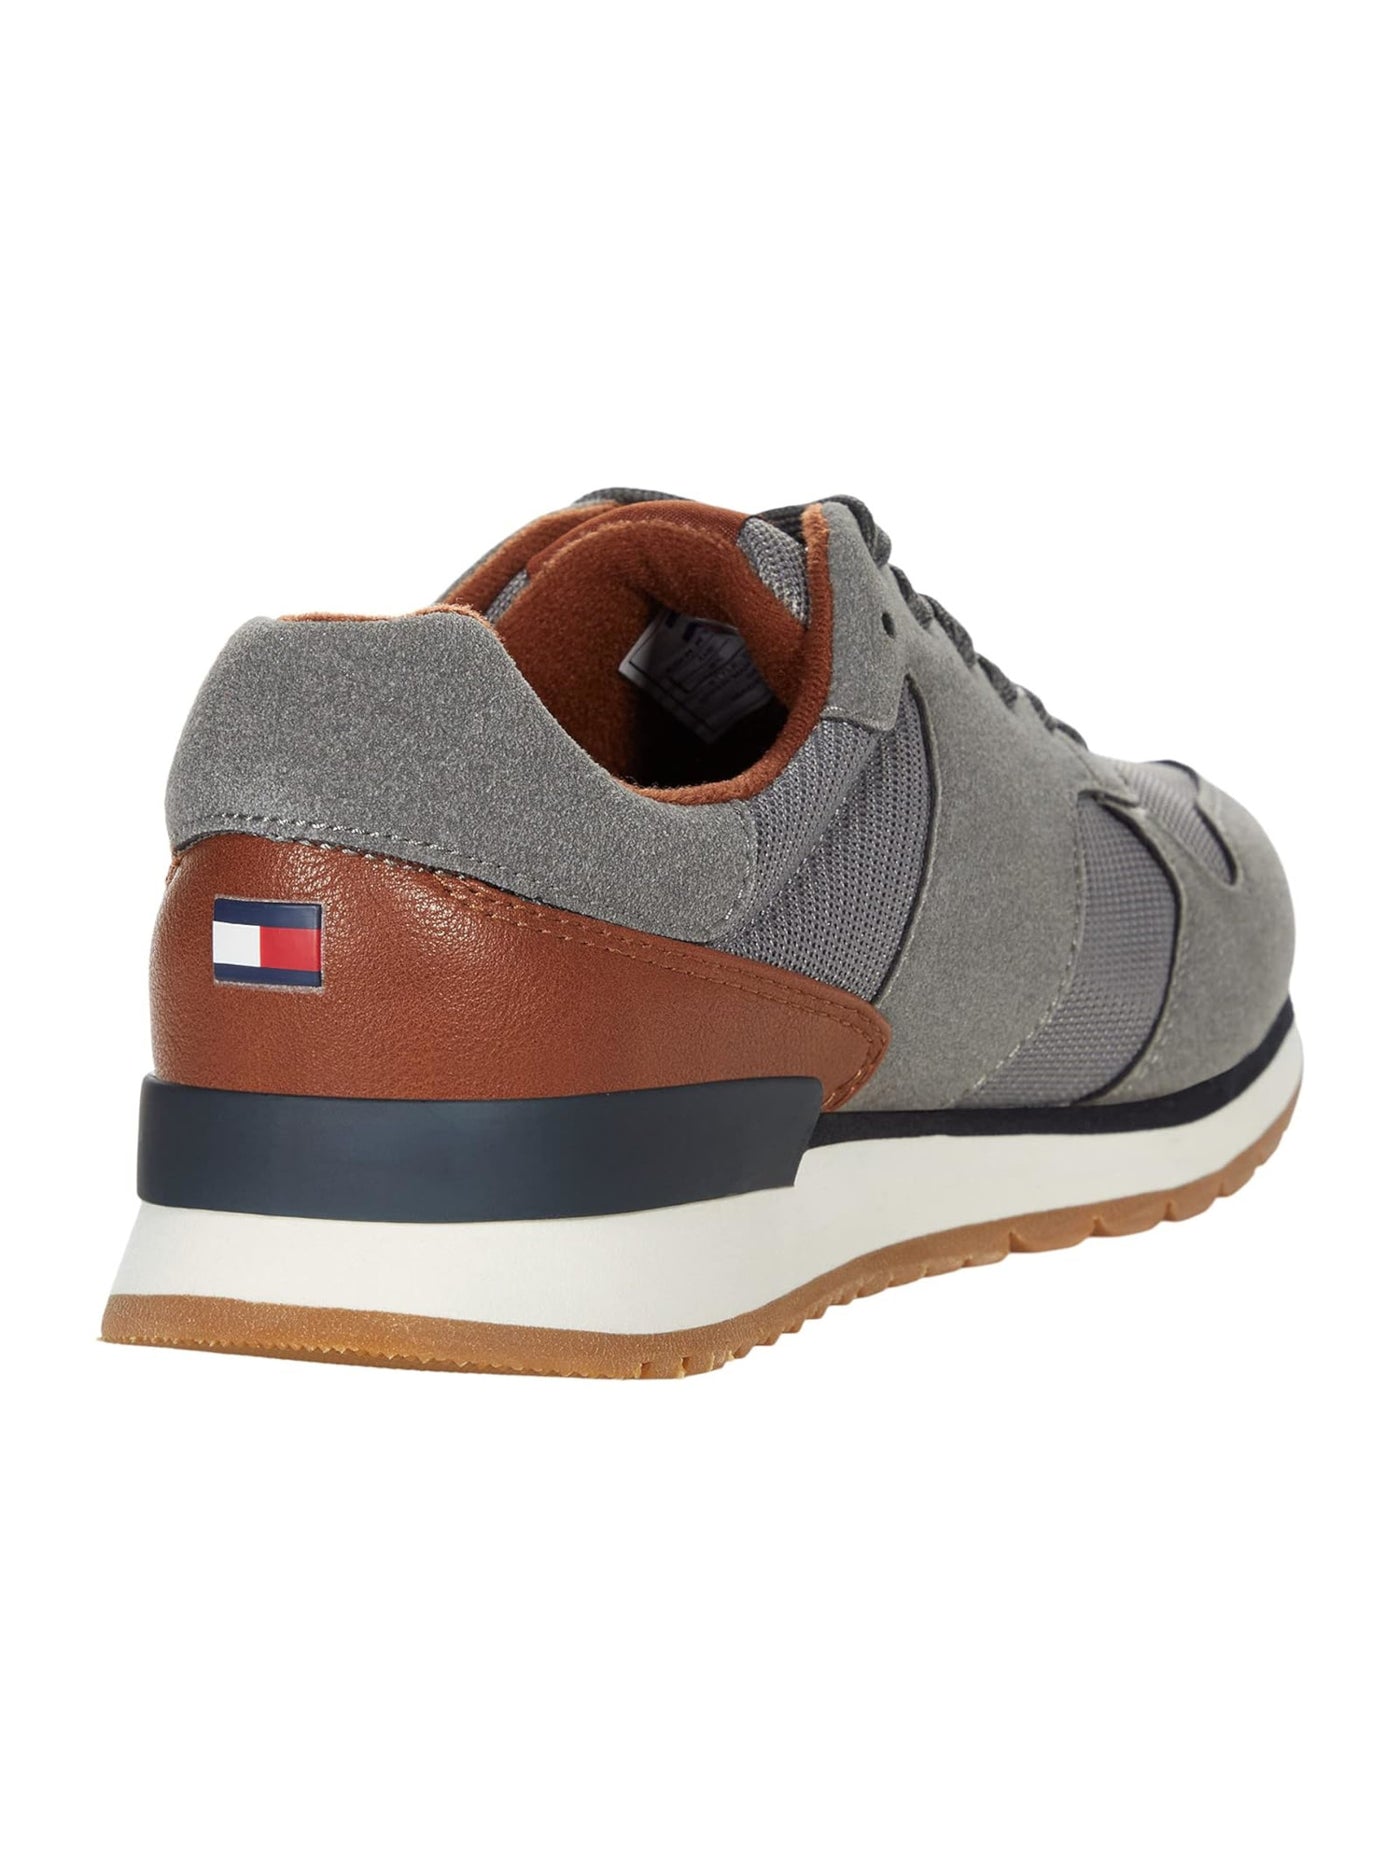 TOMMY HILFIGER Mens Gray Mixed Media Traction Sole Cushioned Anello Round Toe Lace-Up Sneakers Shoes 11